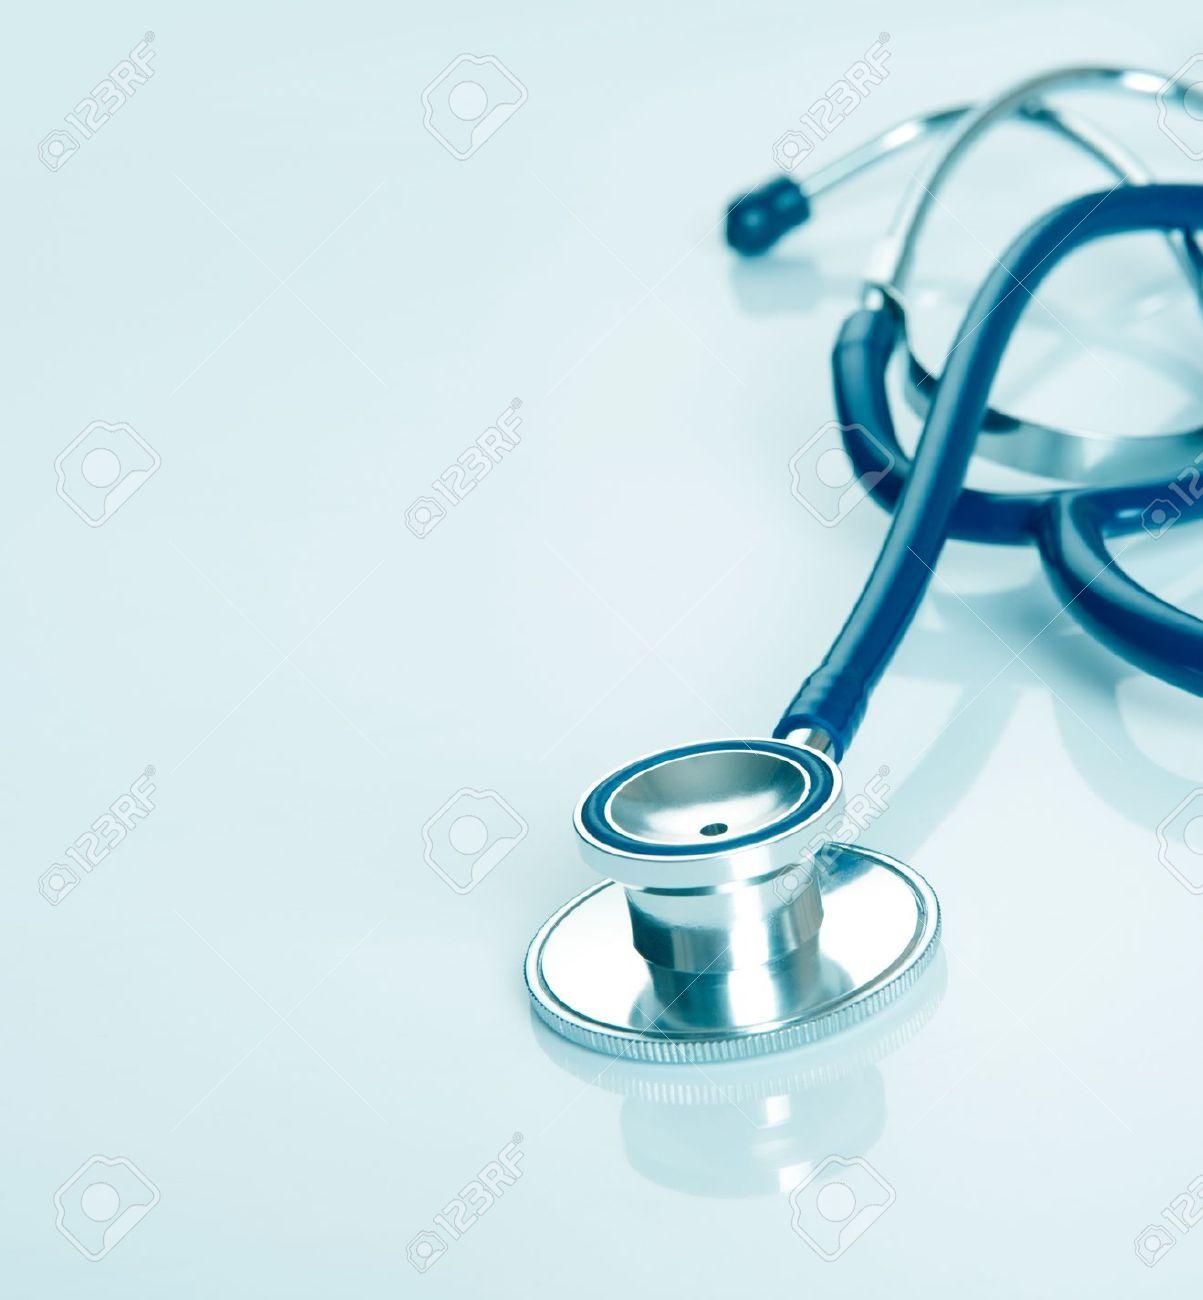 Stethoscope Wallpapers, Stethoscope Full Full HD Quality Wallpapers